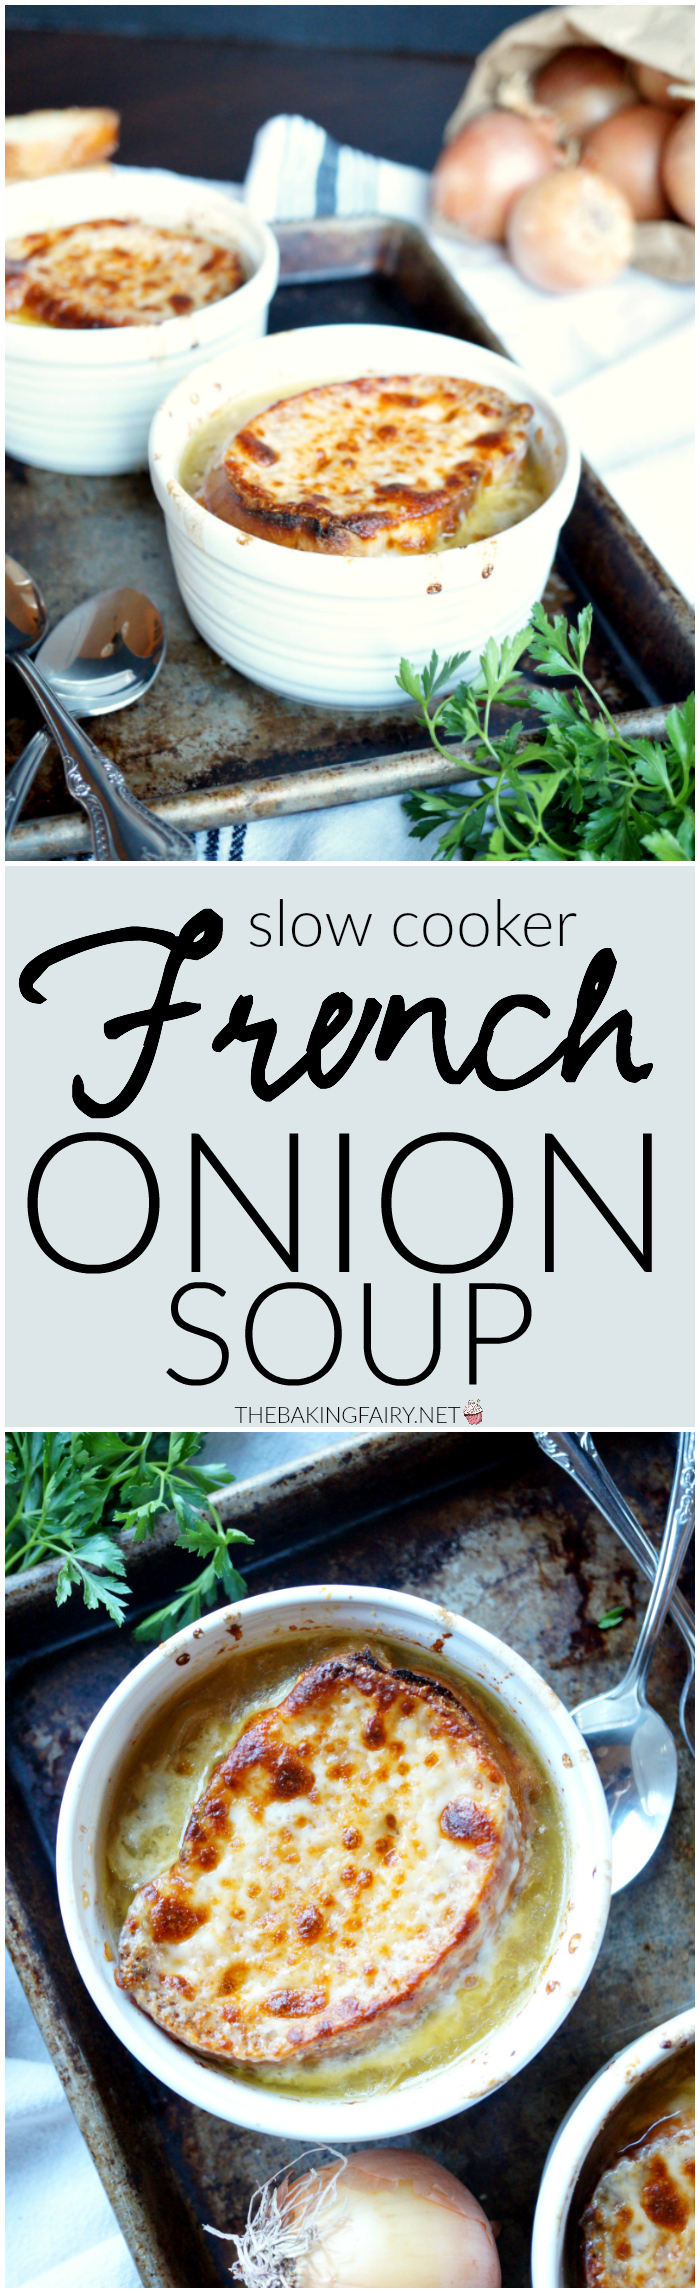 French Onion Soup - Easy Slow Cooker Recipe - The Magical Slow Cooker